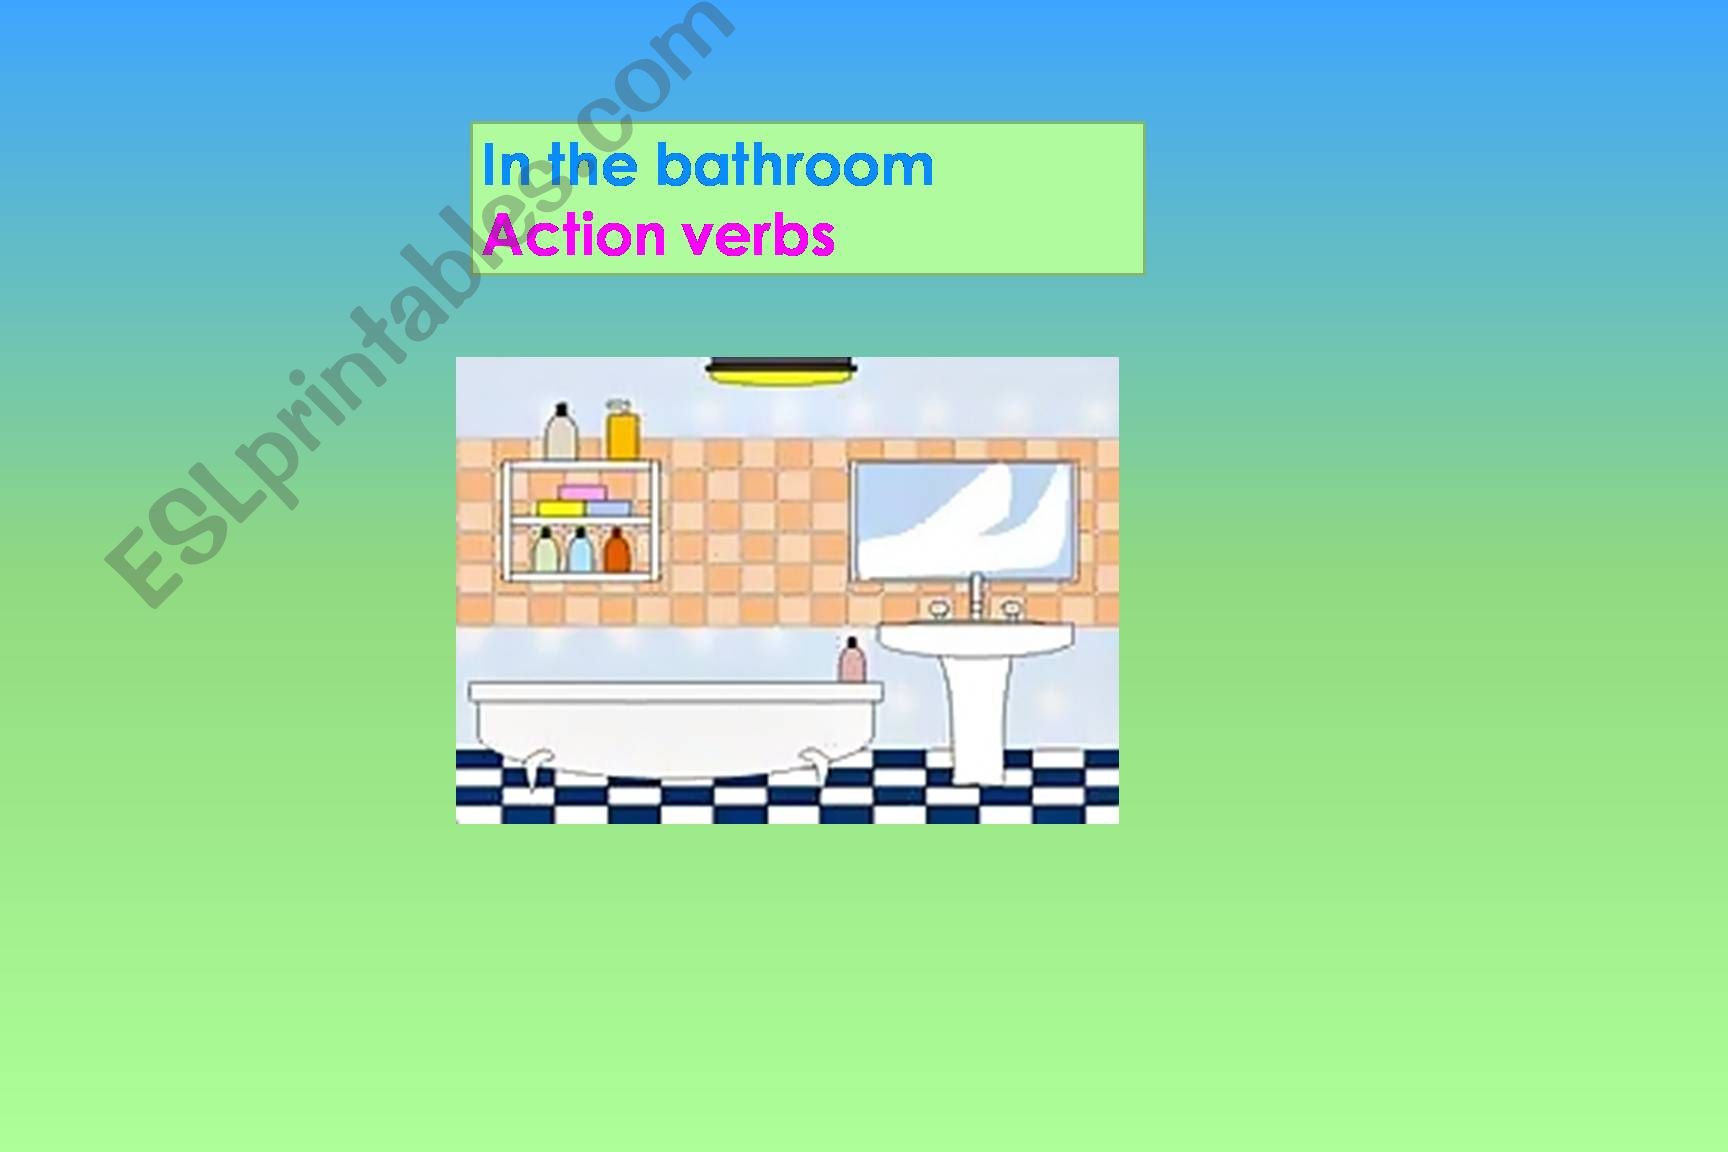 The bathroom with action verbs